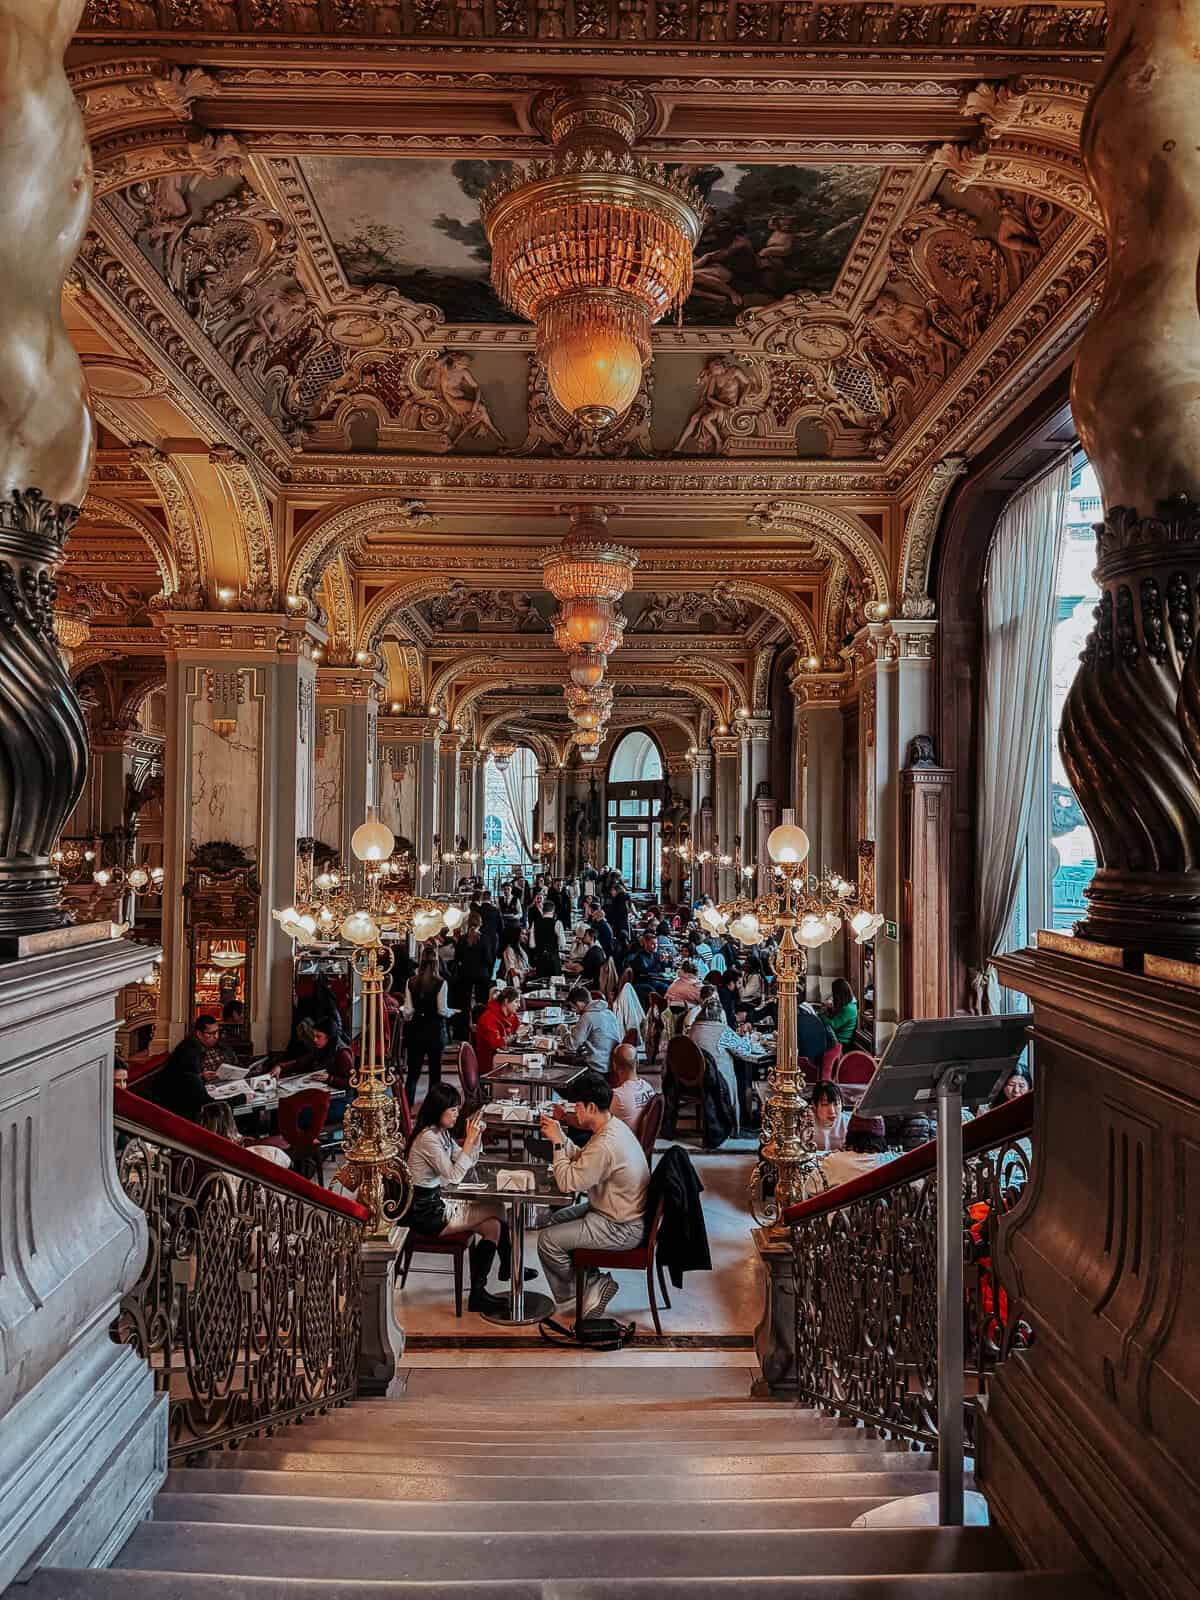 The famous new york cafe in Budapest with gold walls and people sitting down dining